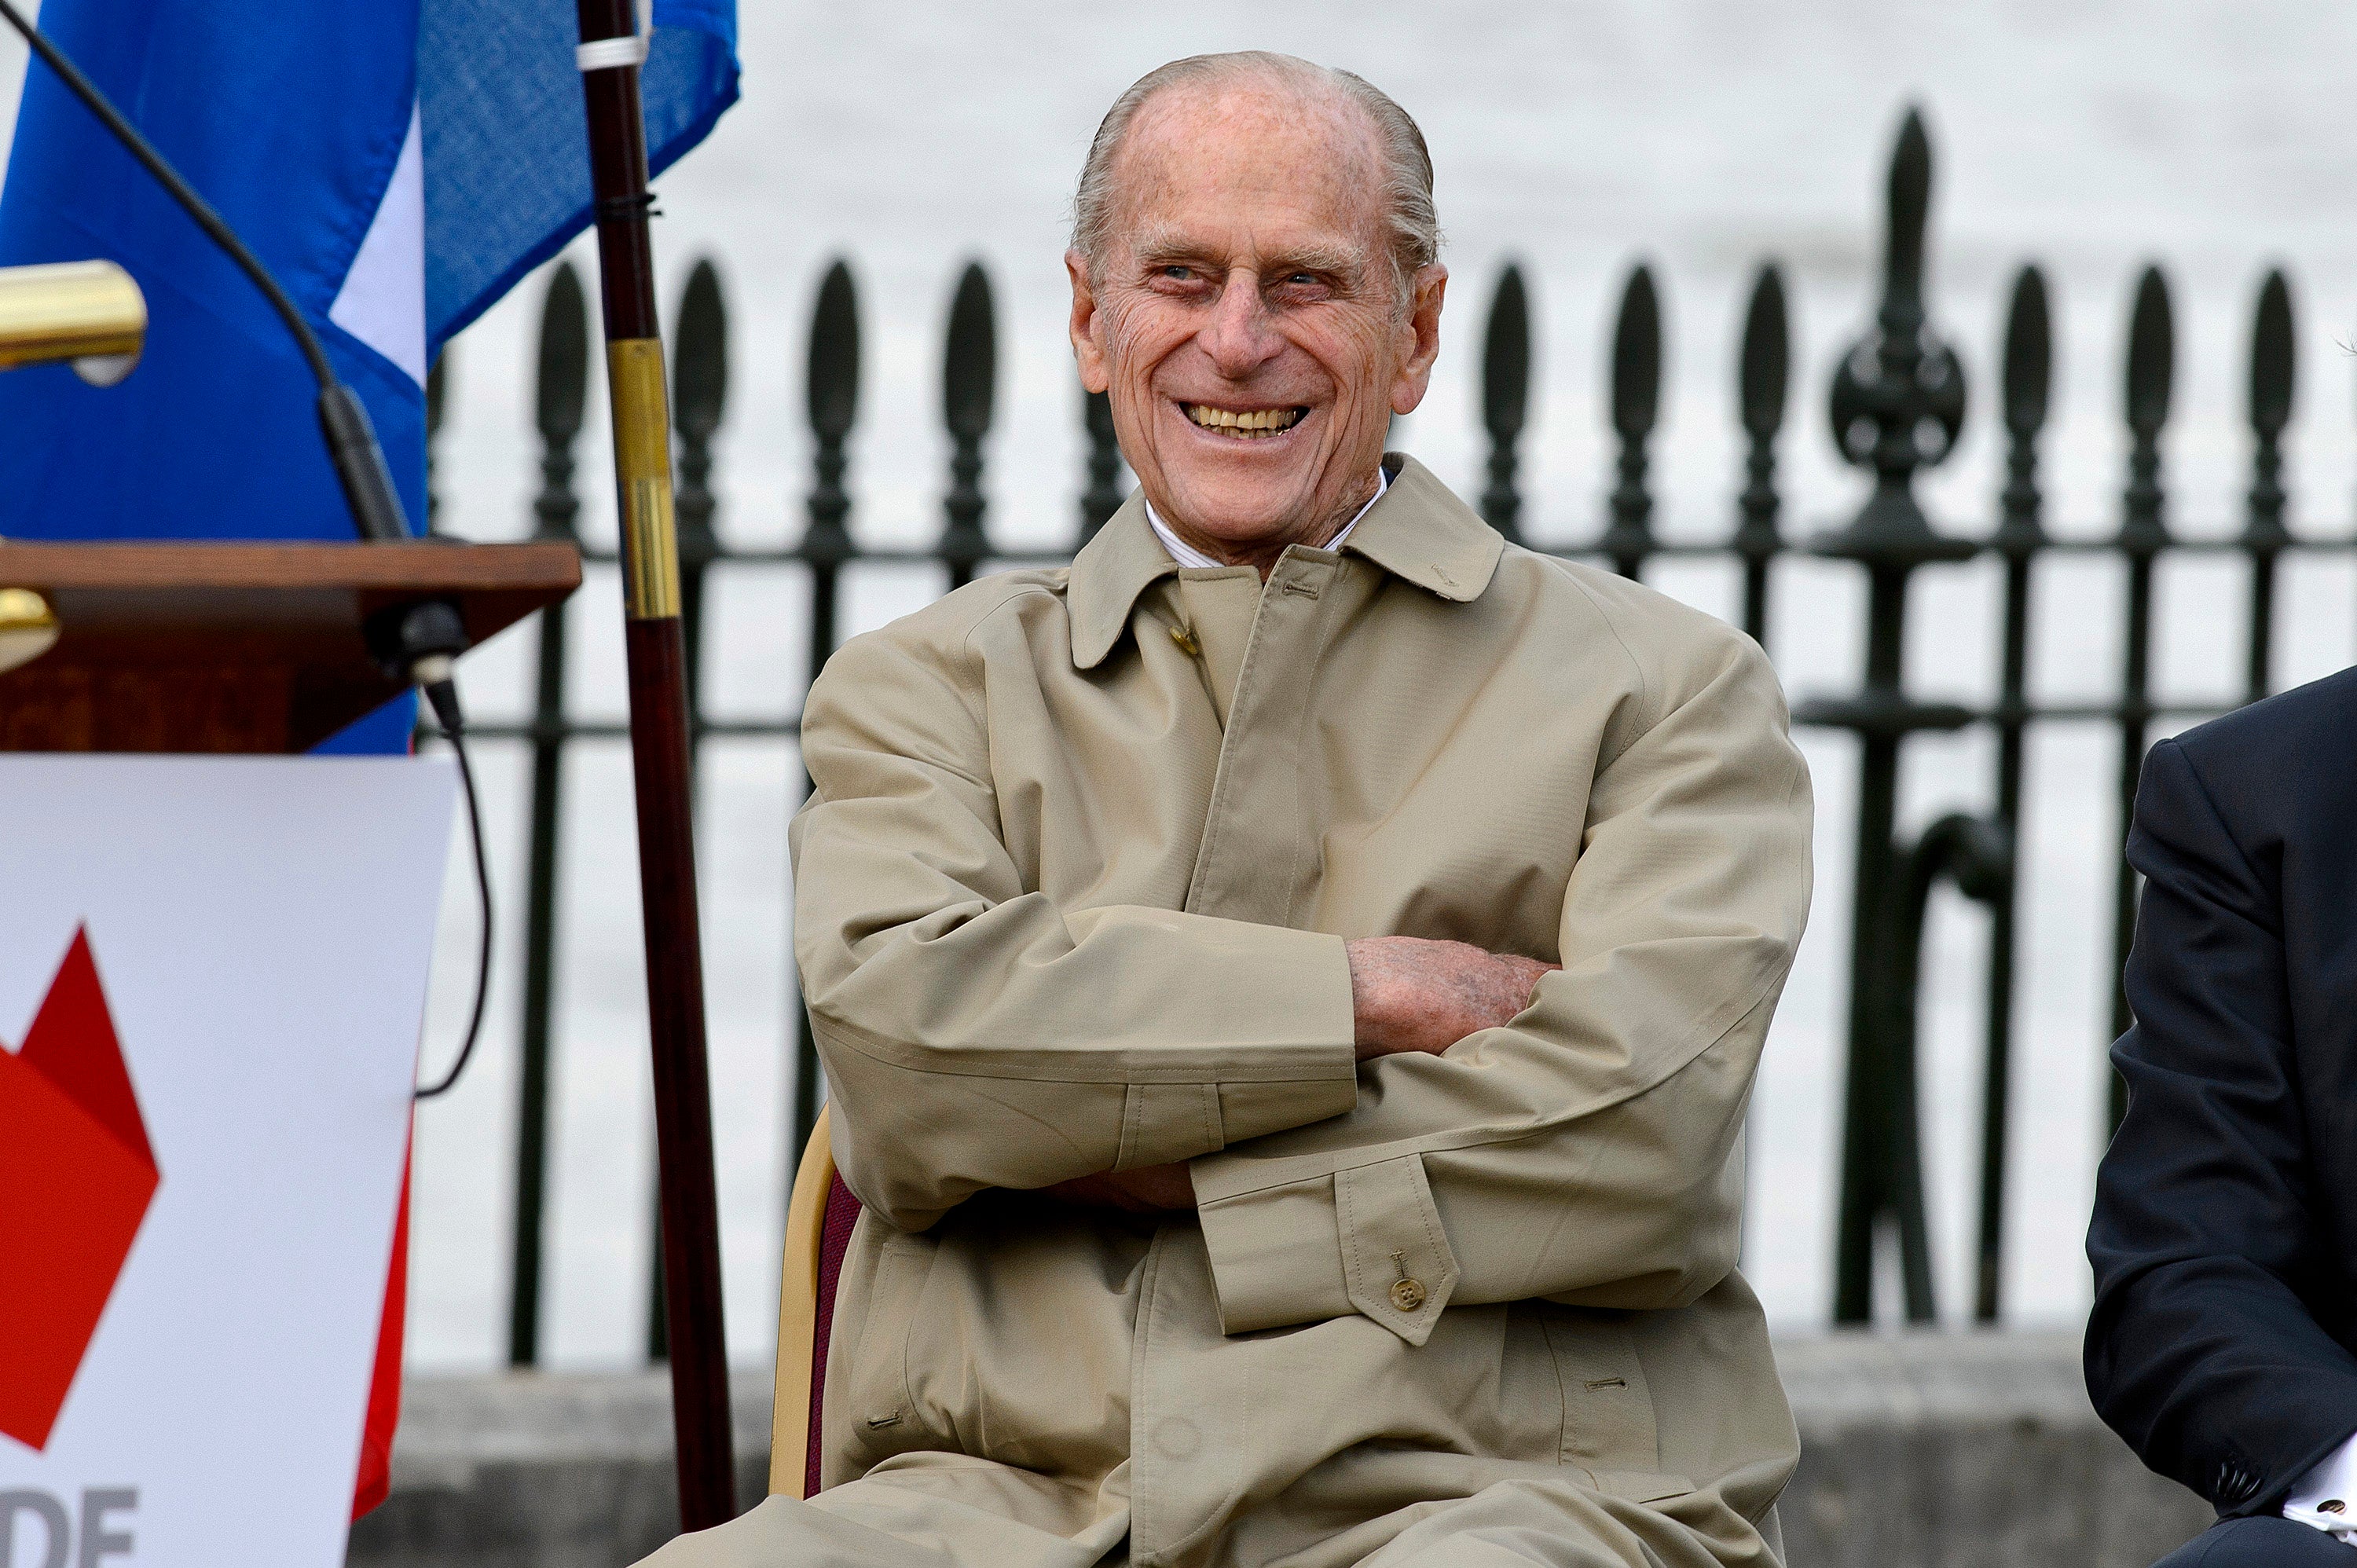 Prince Philip, Duke of Edinburgh attends the renaming ceremony for ‘The City Of Adelaide’ clipper ship at the Old Royal Naval College on 18 October, 2013 in Greenwich, England. A new national flagship will reportedly be named in the late Prince Philip’s honour.